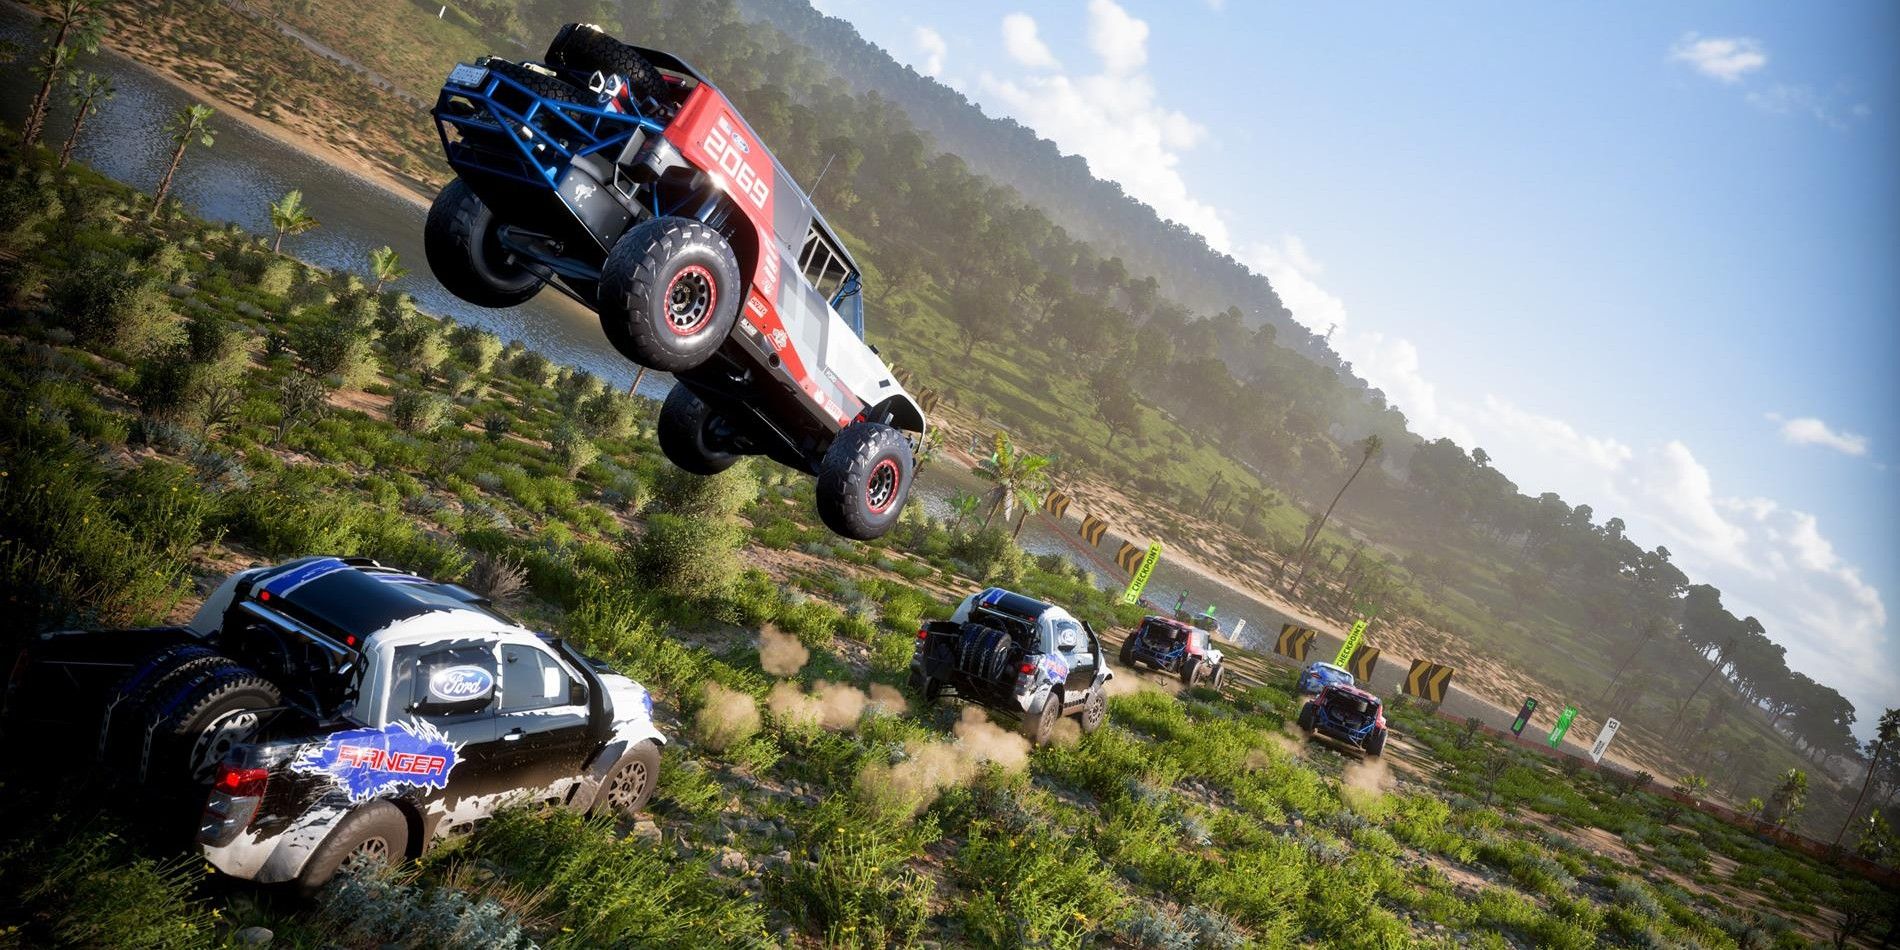 Forza Horizon 5 turns every race into an exciting spectacle.